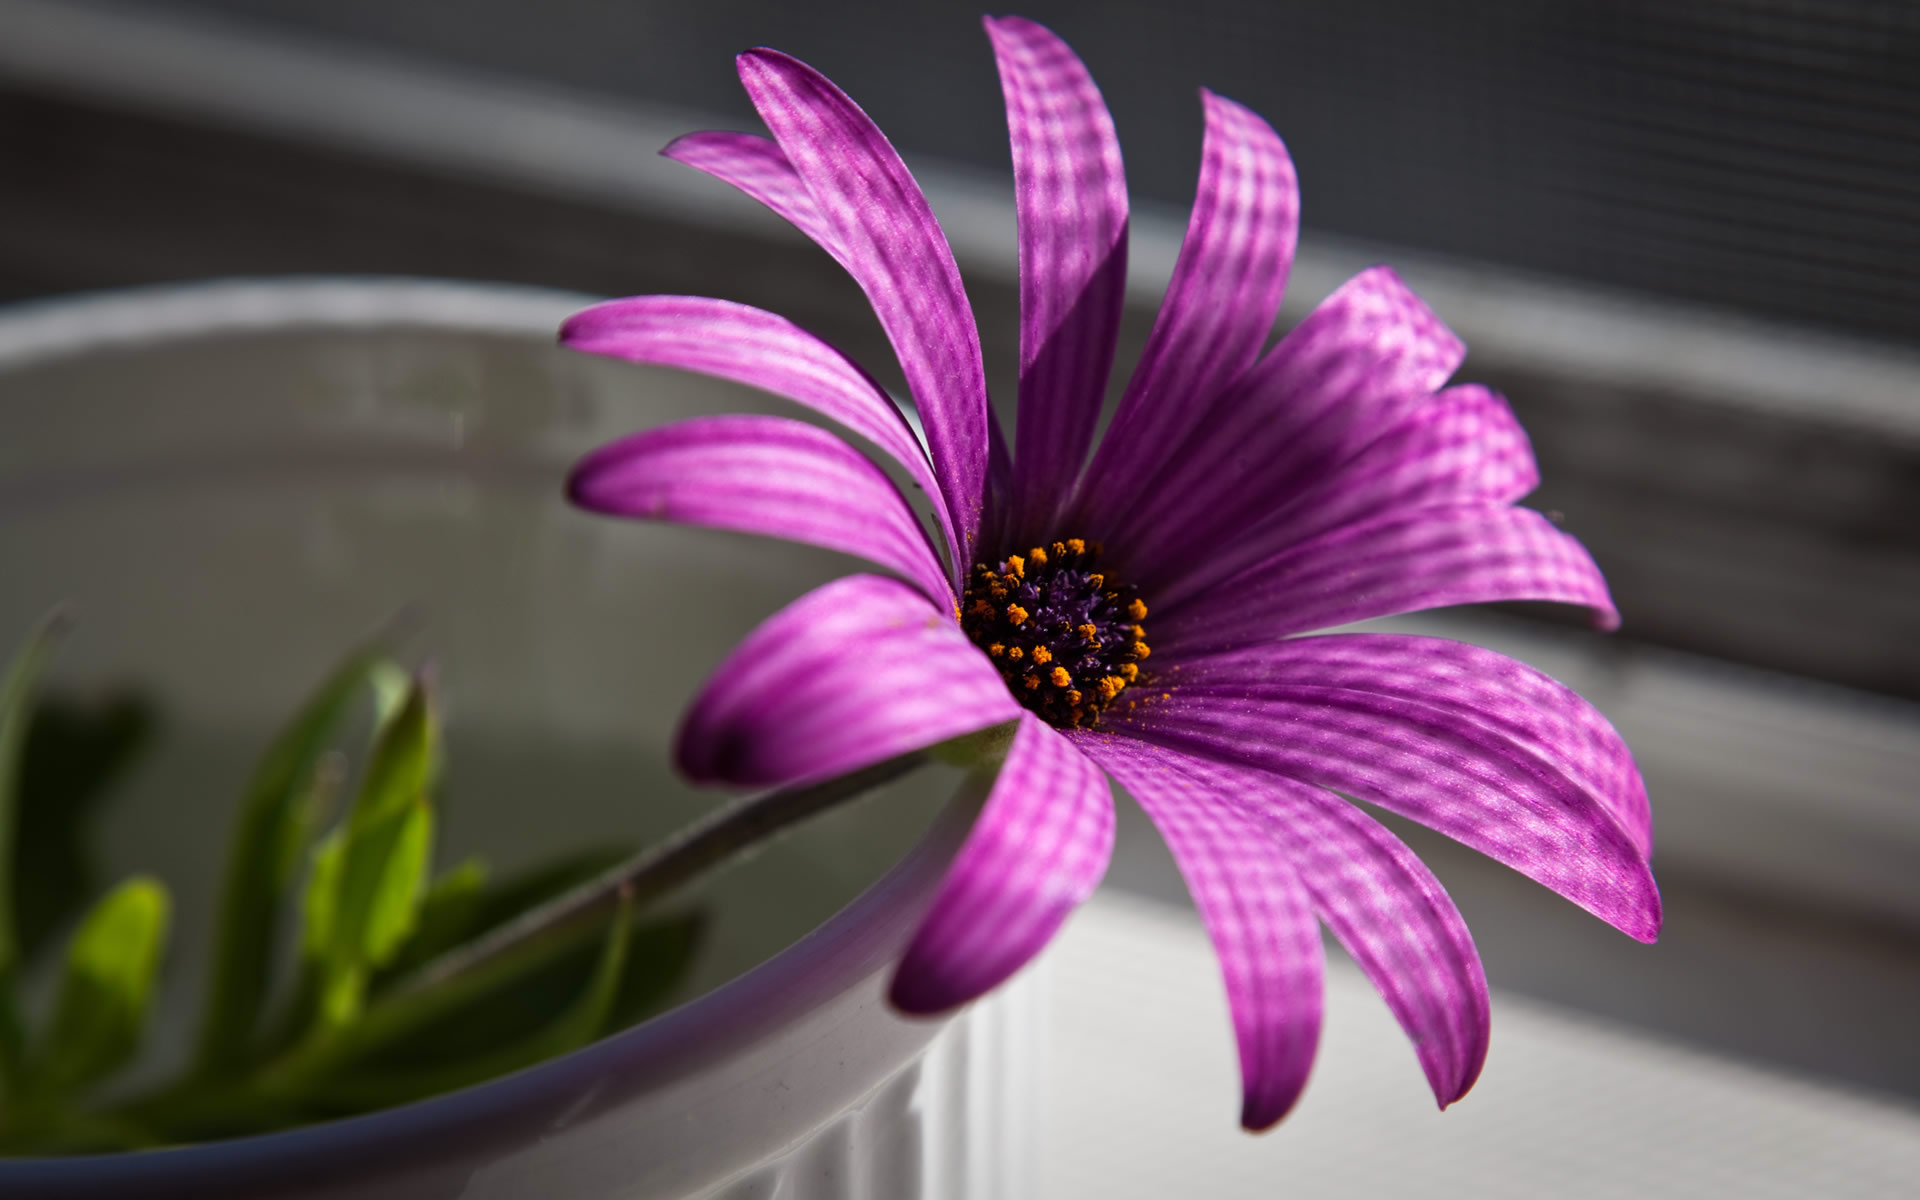 Purple Flower In The Pot High Quality Wallpaper